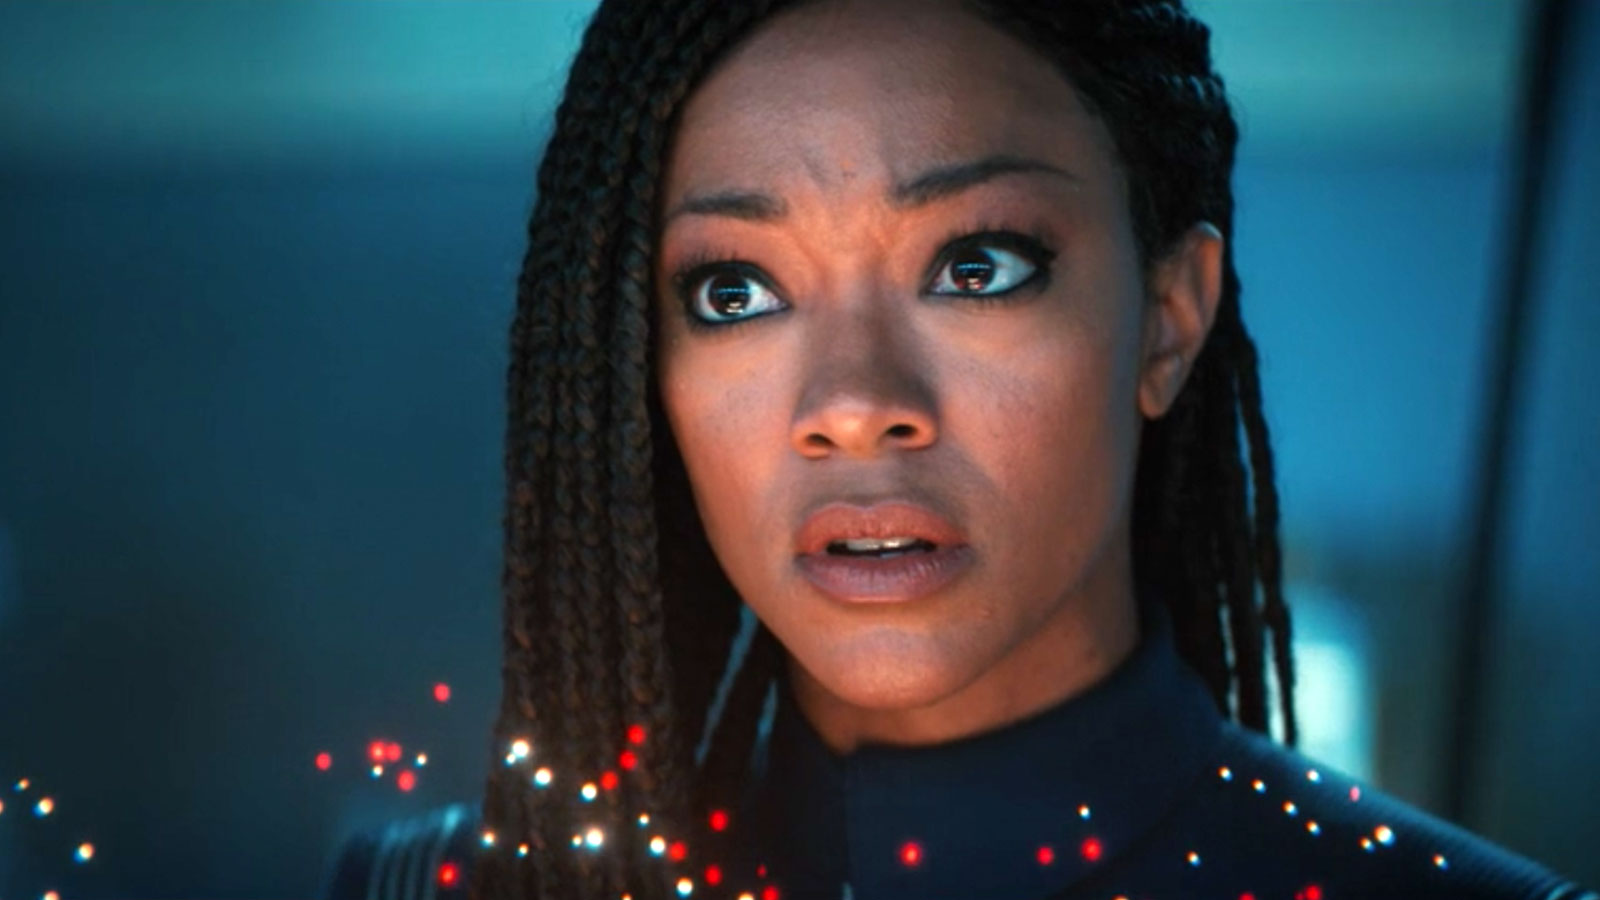 [REVIEW] Star Trek: Discovery – Season 3, Episode 7 “Unification III”: Discovery Helps Unify The Franchise